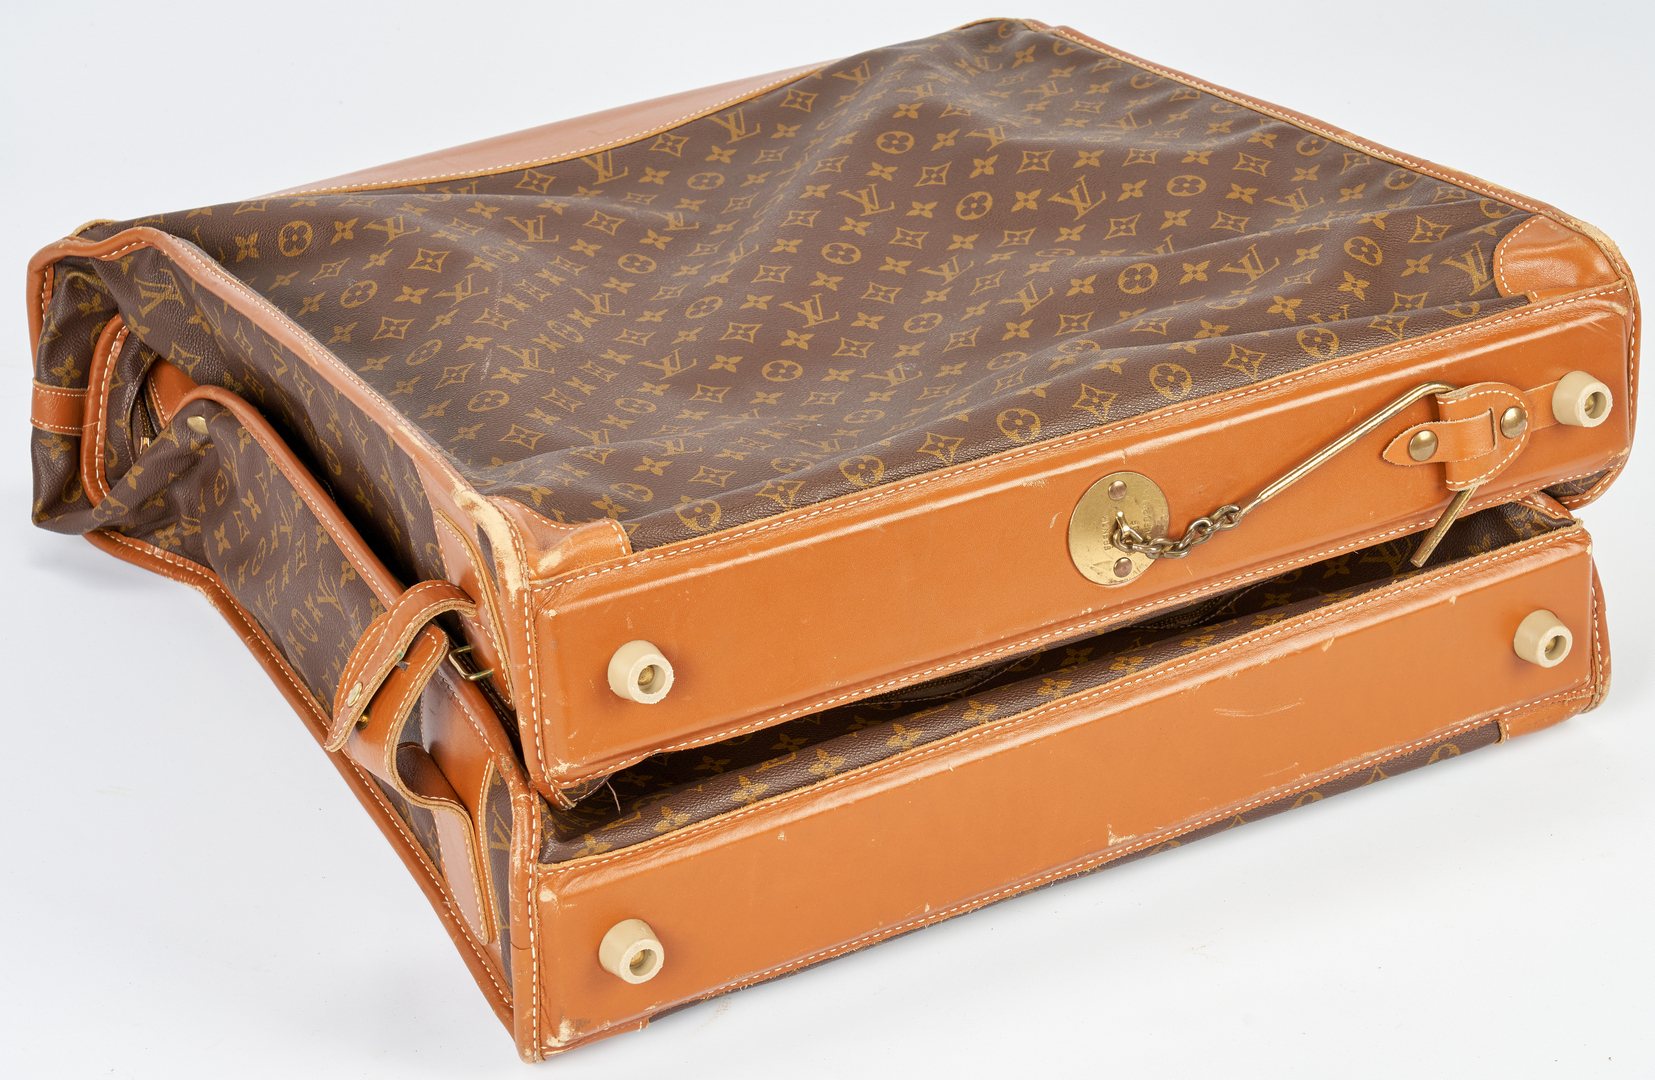 Lot 703: 4 Louis Vuitton Luggage Items